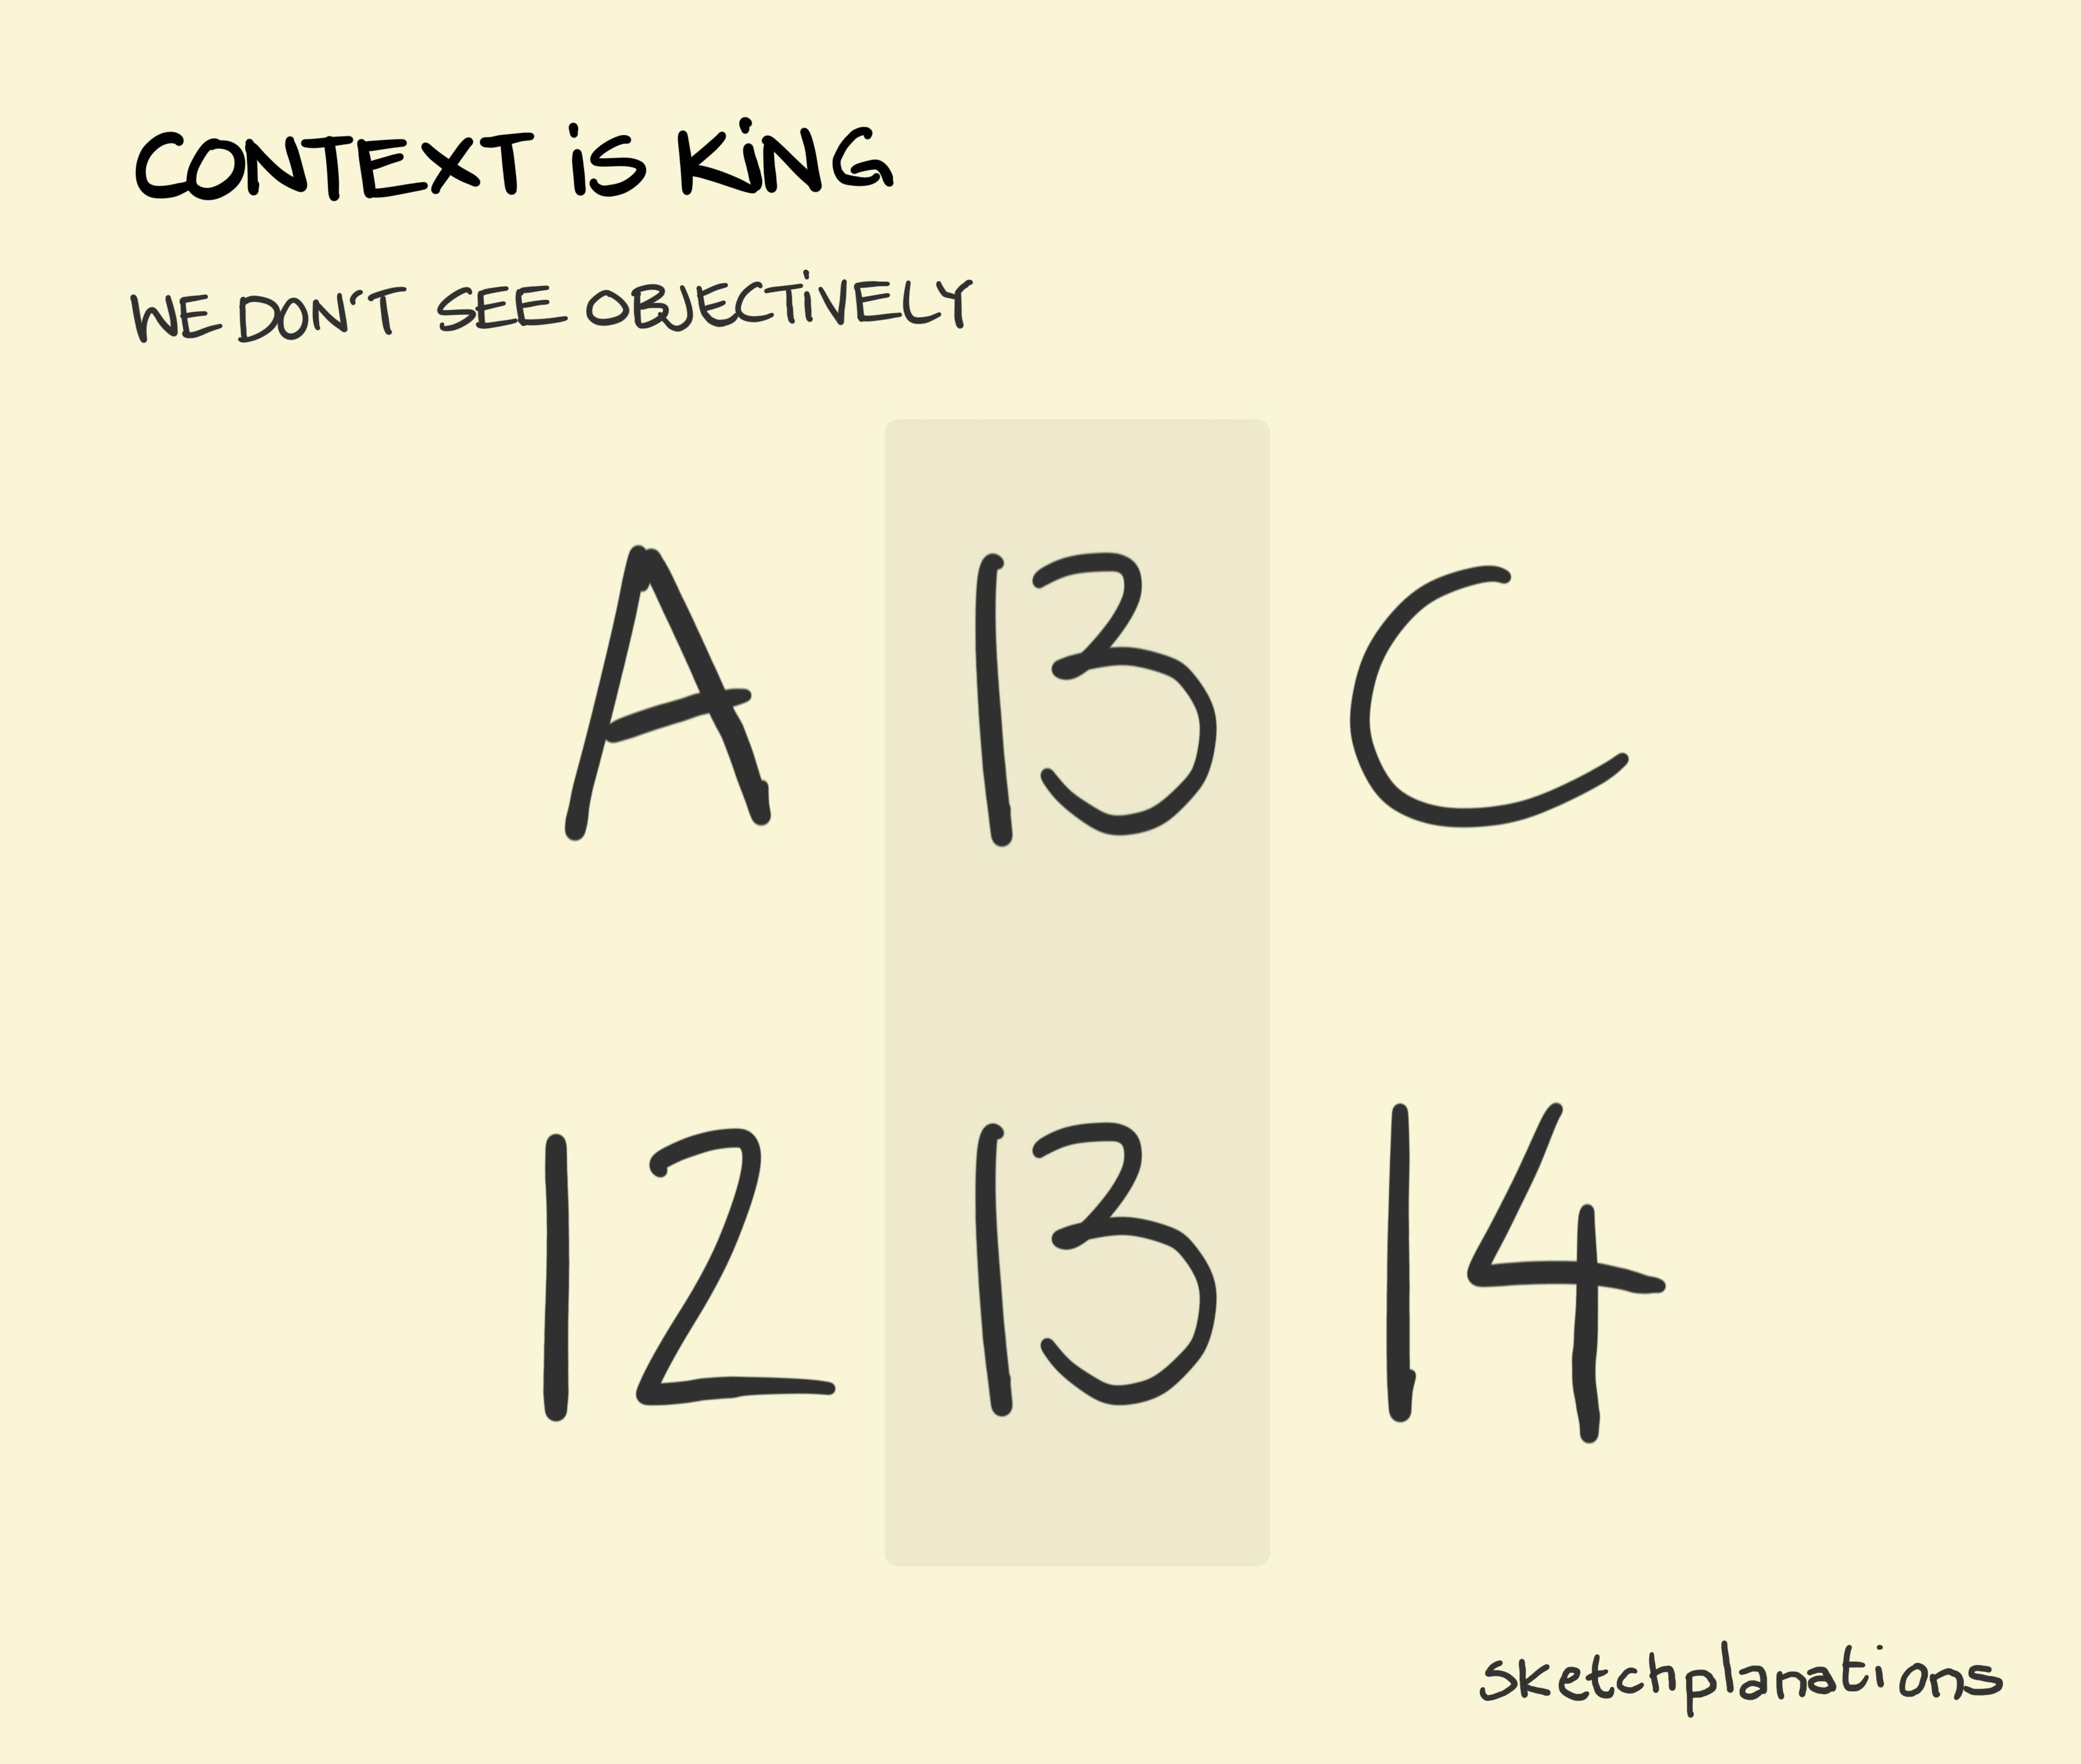 Context is King illustration: the capital letters A, B and C are handwritten in sequence on the top row. On the bottom row, it's the numbers 12, 13 and 14 - again handwritten. When you look closely, you notice that the letter B and the number 13 take exactly the same form. It is only the characters that come before and after in each sequence that define them. 